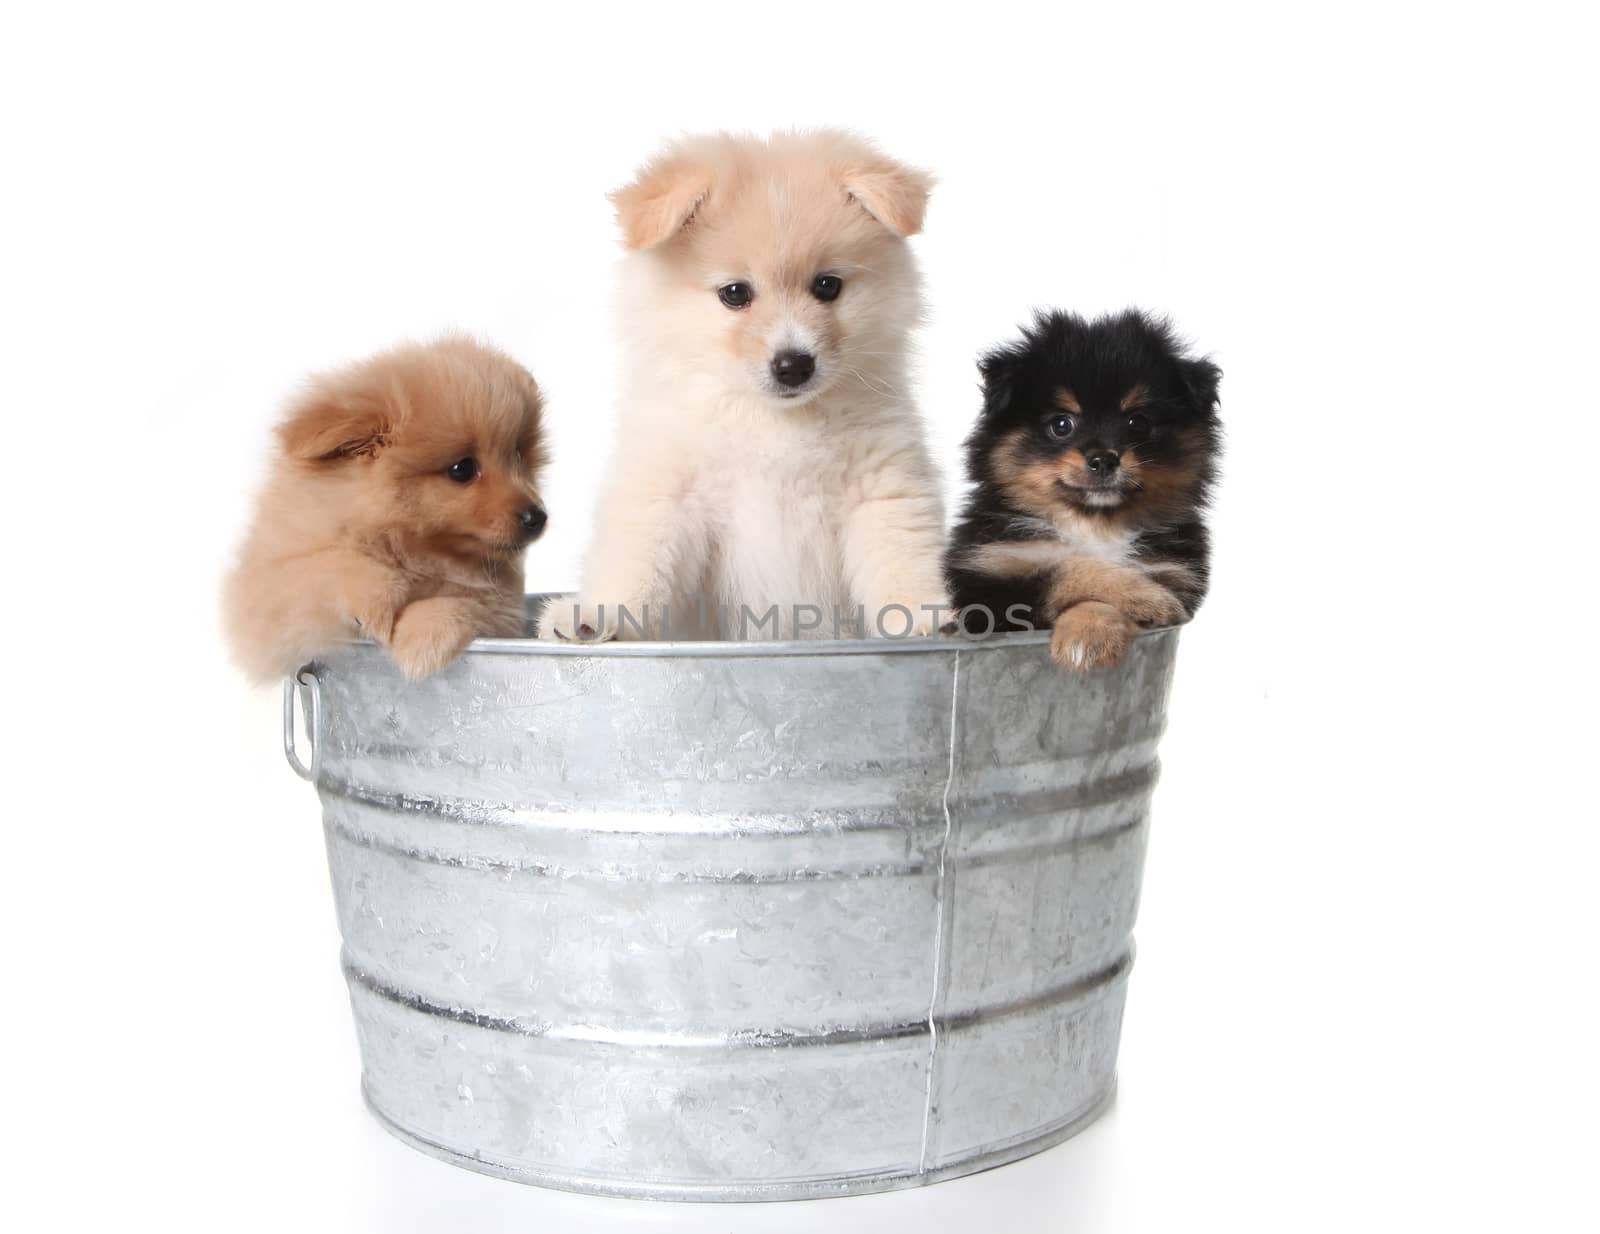 Three Cute Pomeranian Puppies in a Metal Washtub Hanging Out